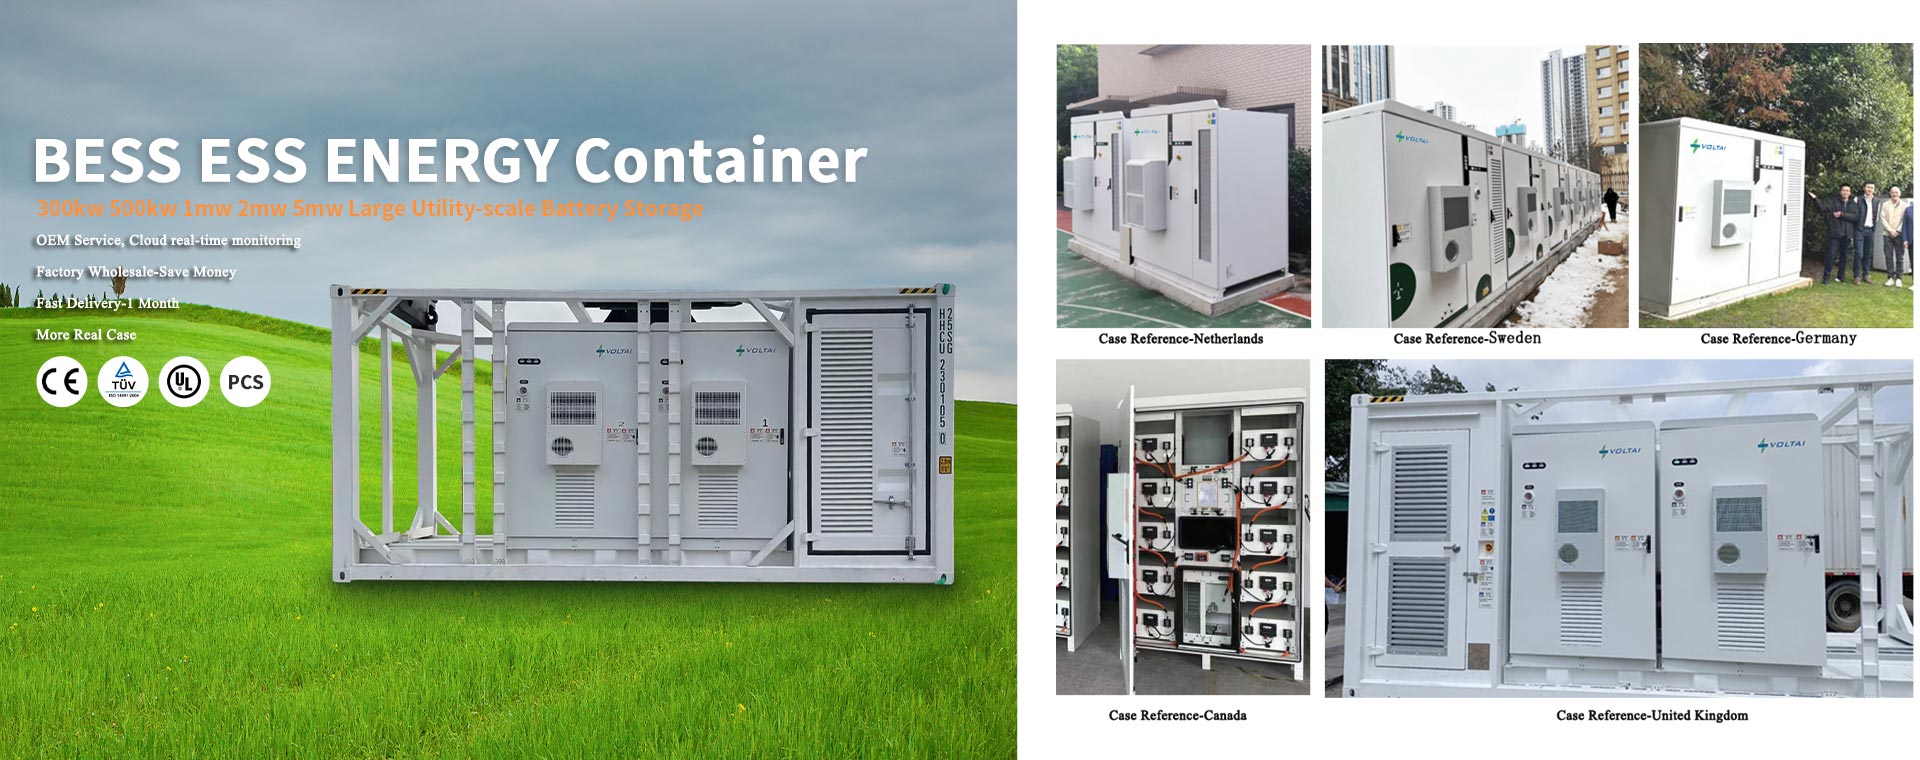 bess(energy container storage)